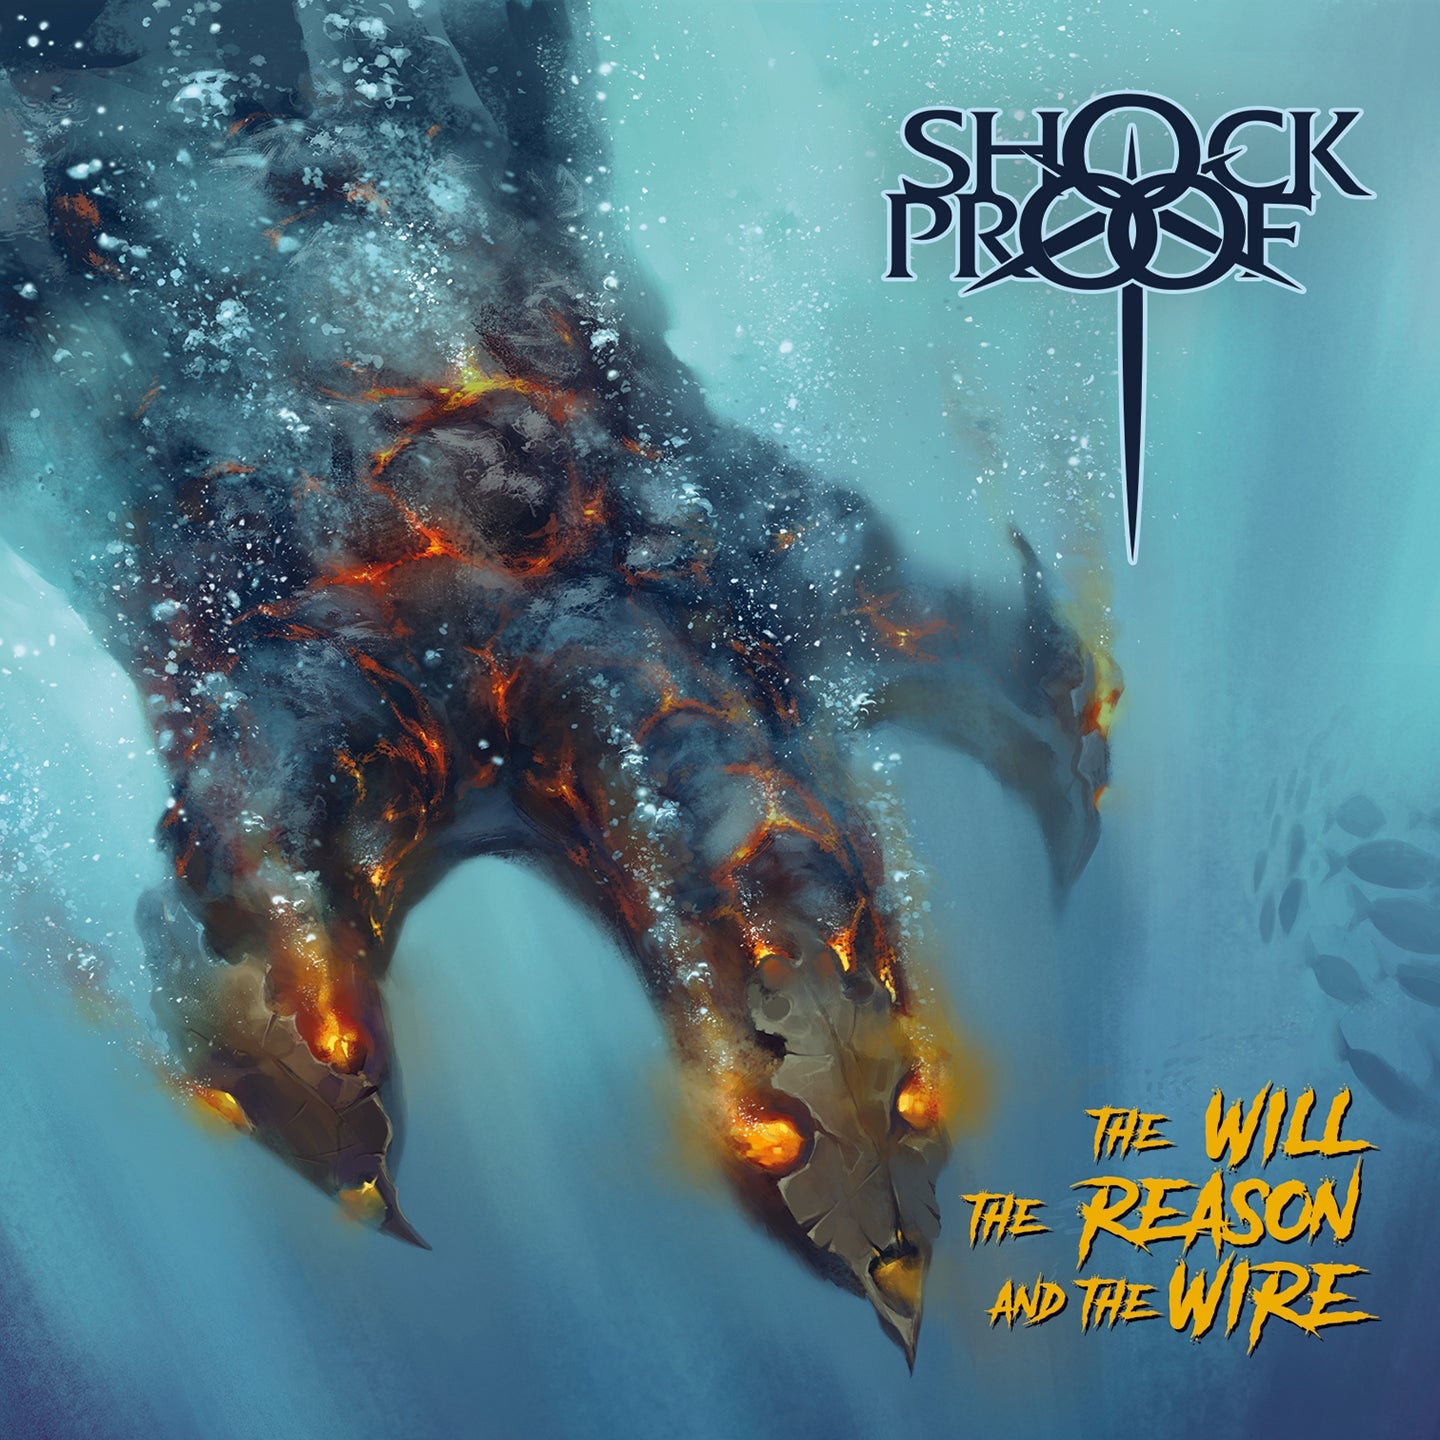 Shockproof "The Will The Reason and The Wire" Digital album